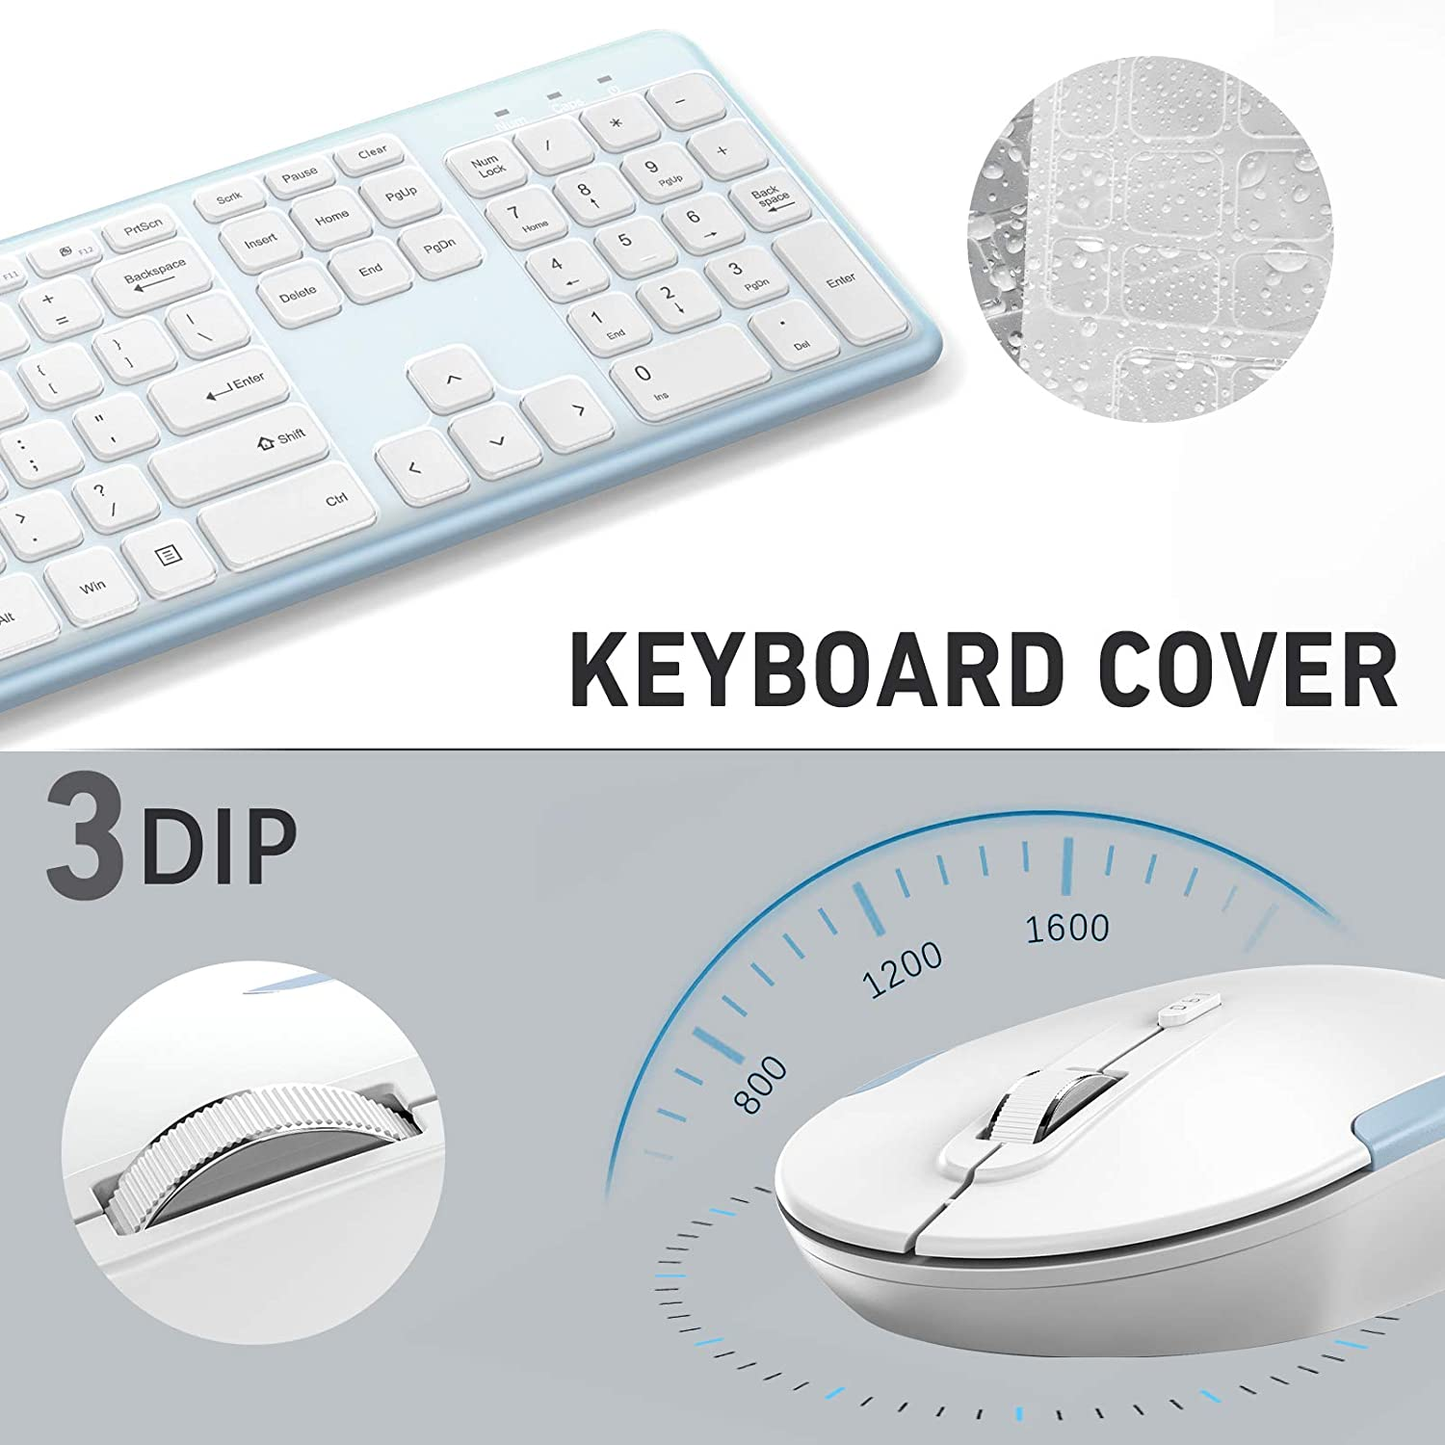 Wireless Keyboard and Mouse Combo, 2.4Ghz Ultra-Thin Wireless Keyboard and Mouse, Full Size Keyboard Mouse Combo with Numeric Keypad for Computer, Laptop, PC, Desktop, Windows 7/8/10